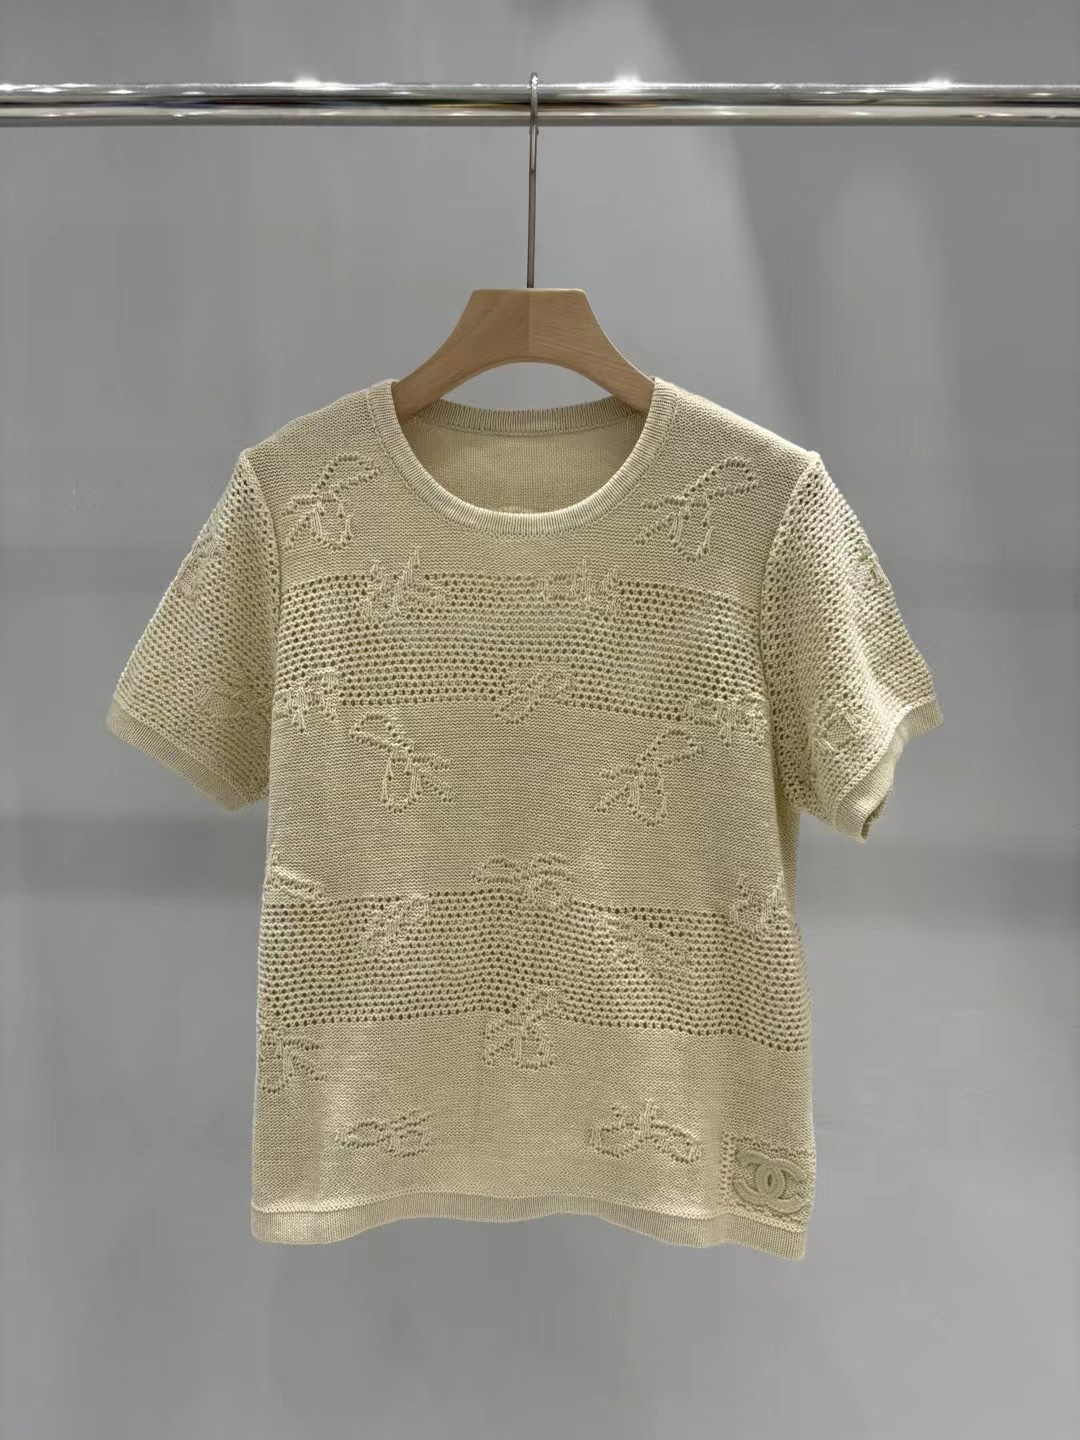 Best Quality Designer
 Chanel Clothing Shirts & Blouses Openwork Knitting Summer Collection